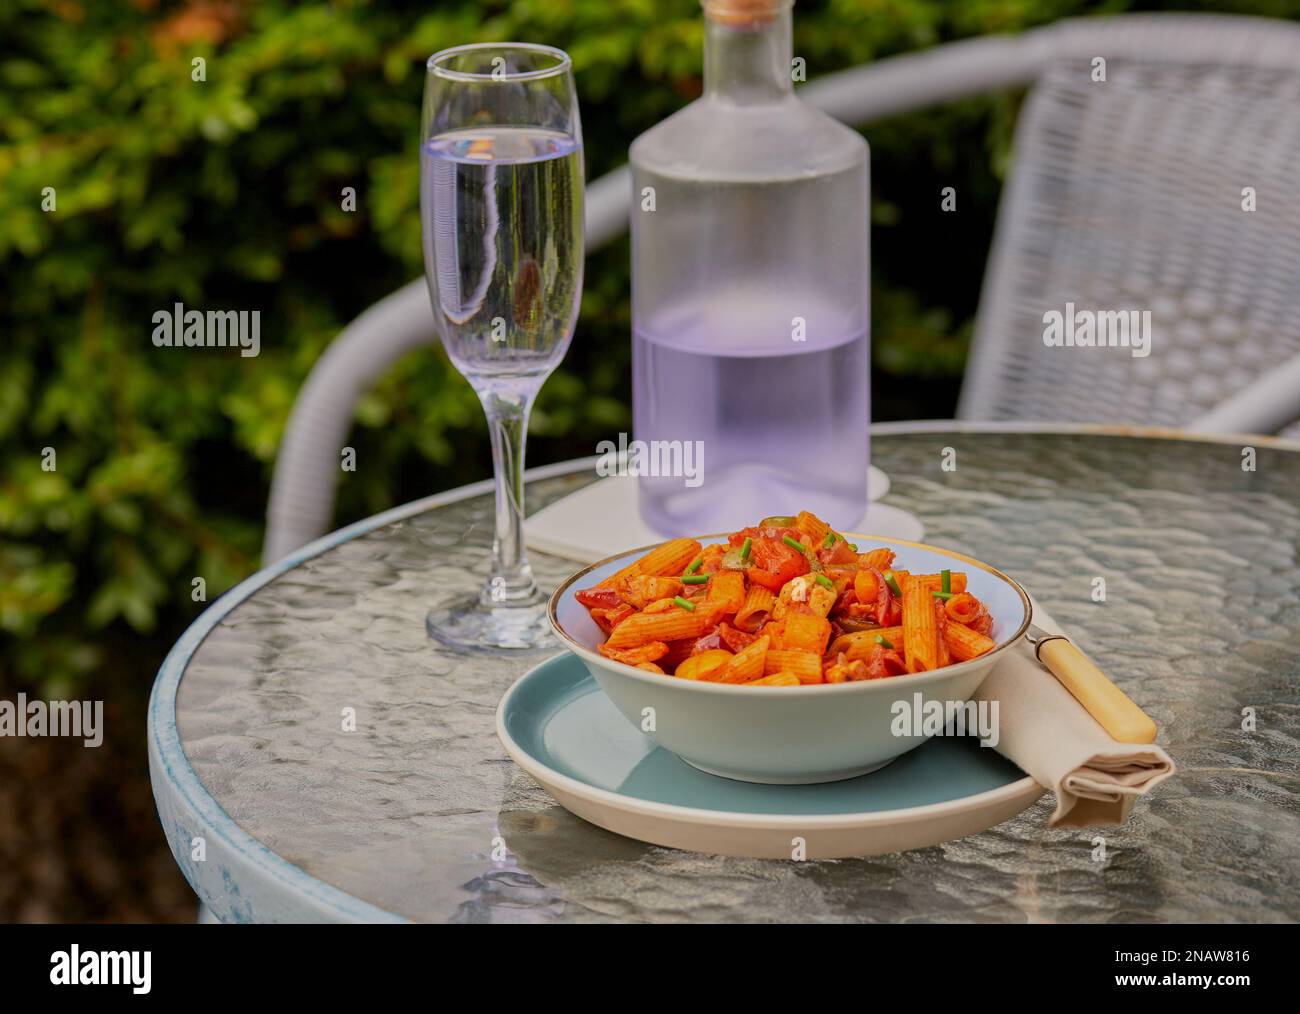 Summer pasta dish outside on a garden table with some drinks, with some greenery in the background. Stock Photo